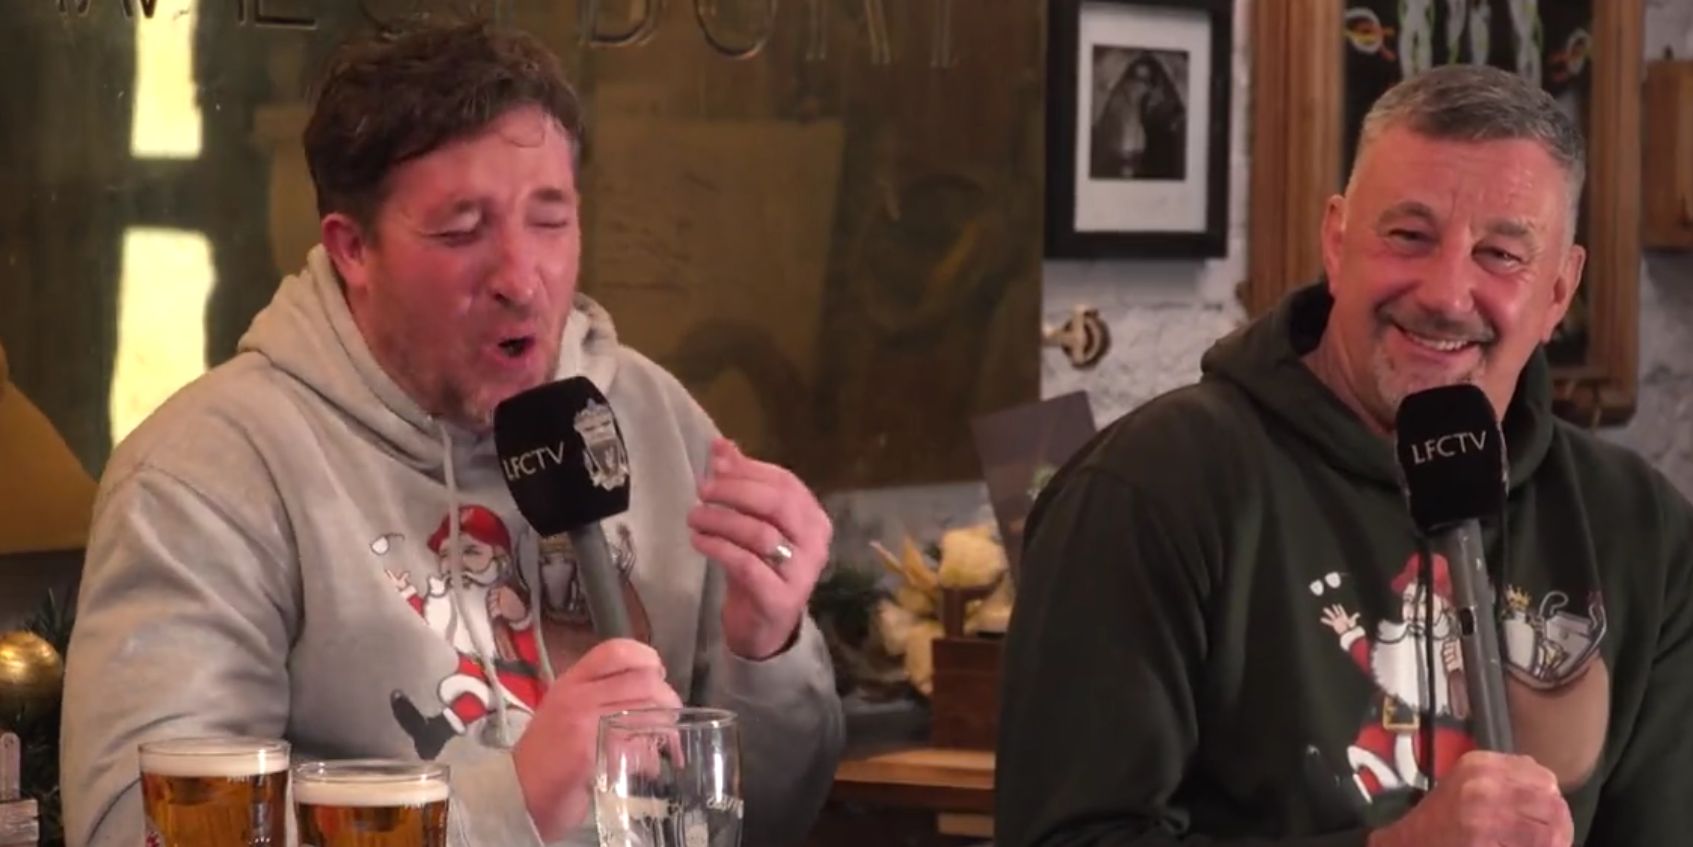 (Video) Robbie Fowler beautifully belts out ‘Feed the world’ with the support of John Aldridge and Jason McAteer